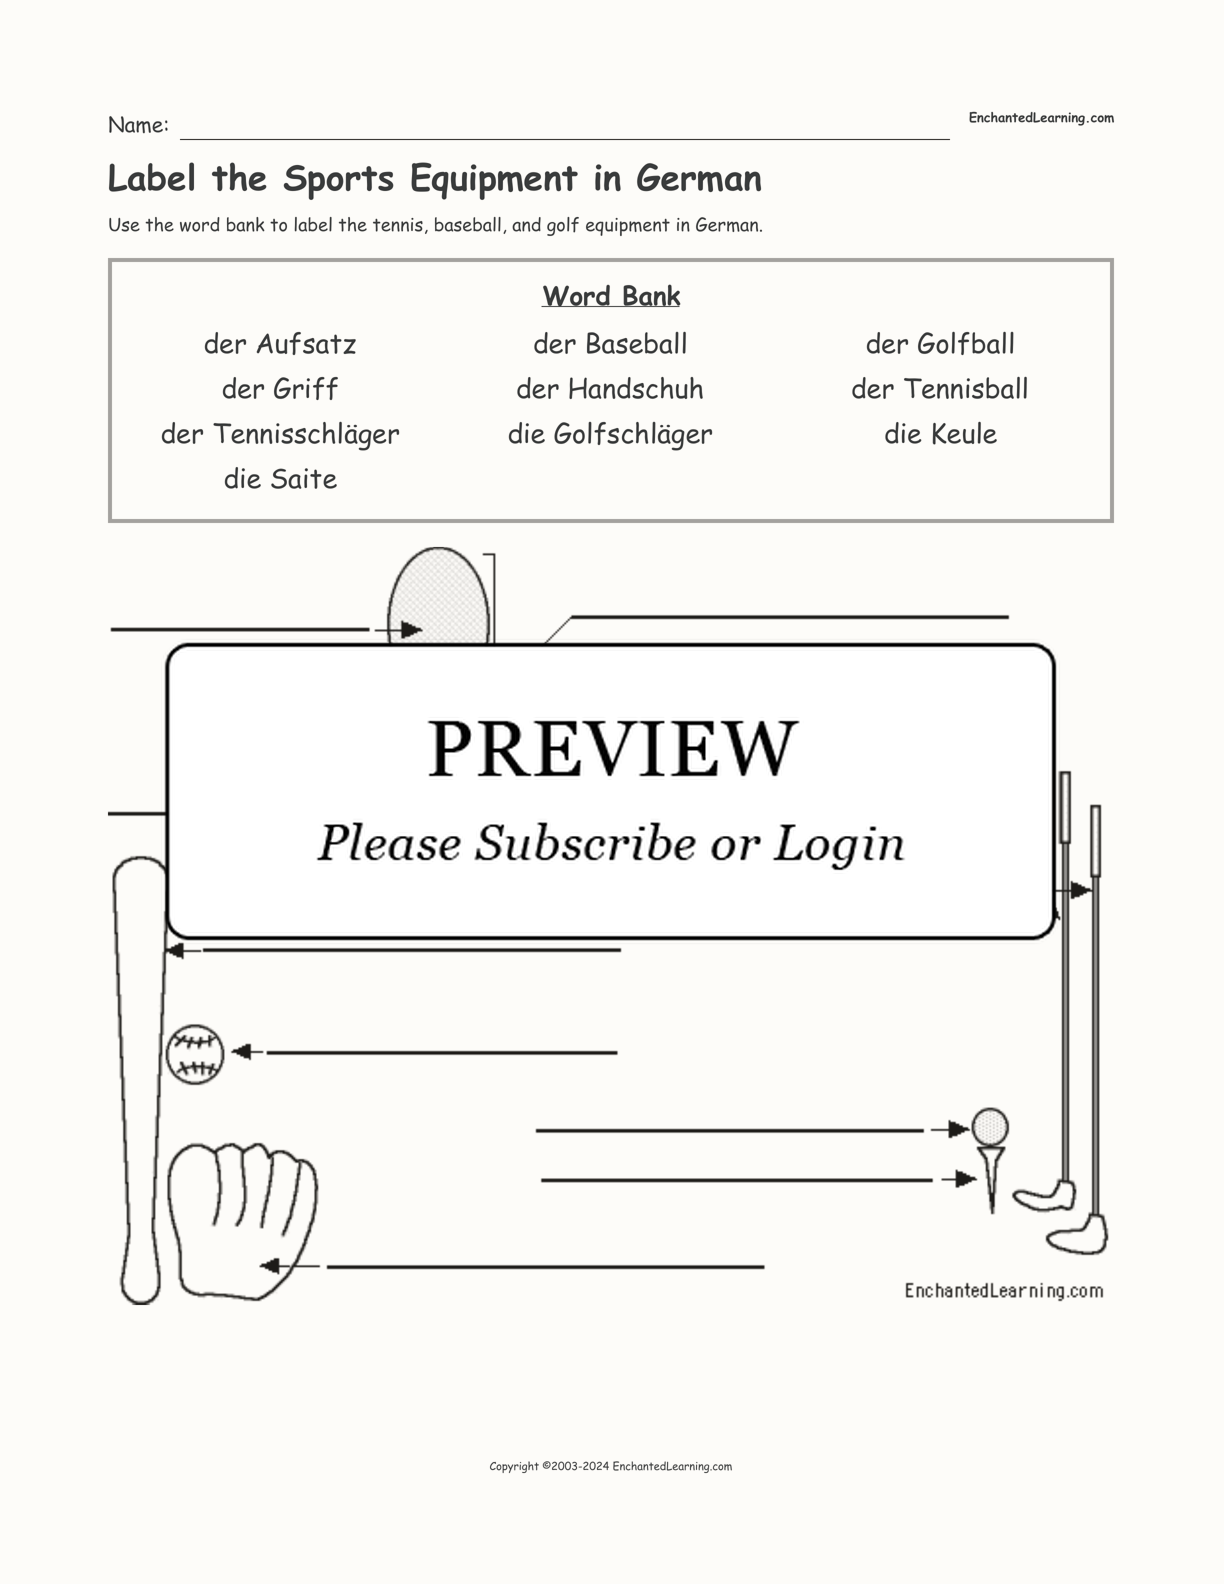 Label the Sports Equipment in German interactive worksheet page 1